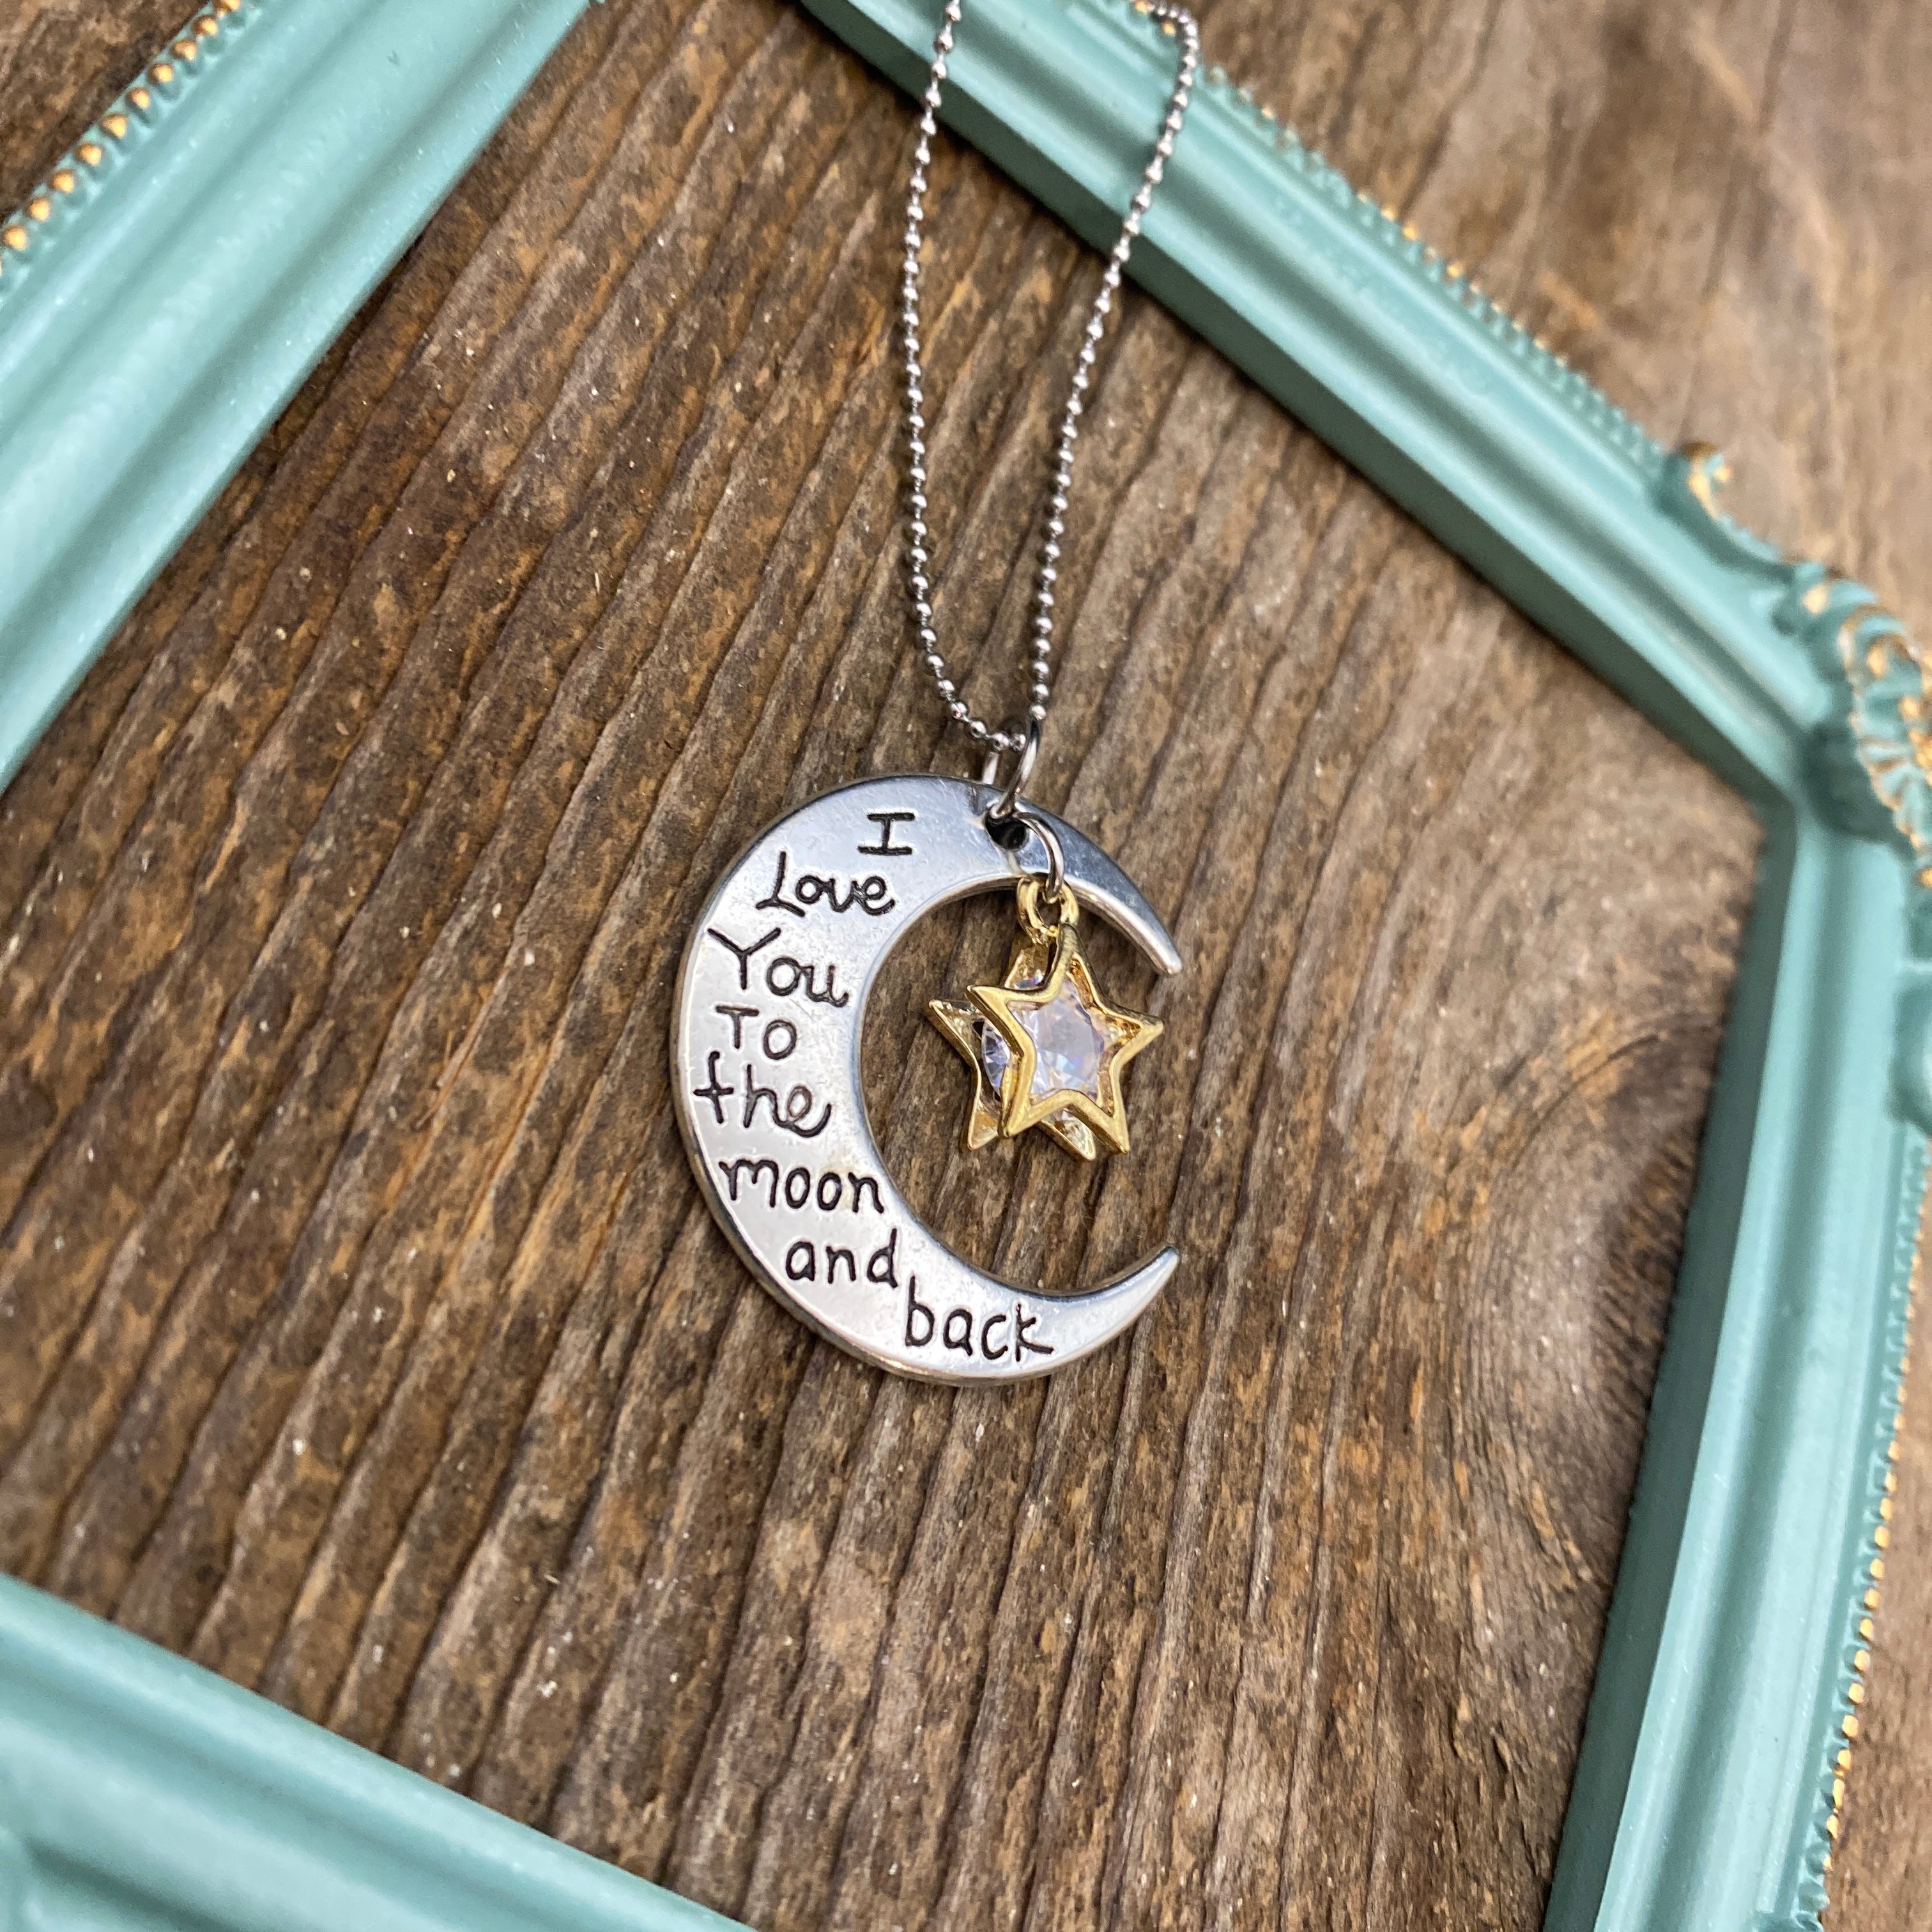 Love You To The Moon&Back Necklace - gnoceoutlet.com